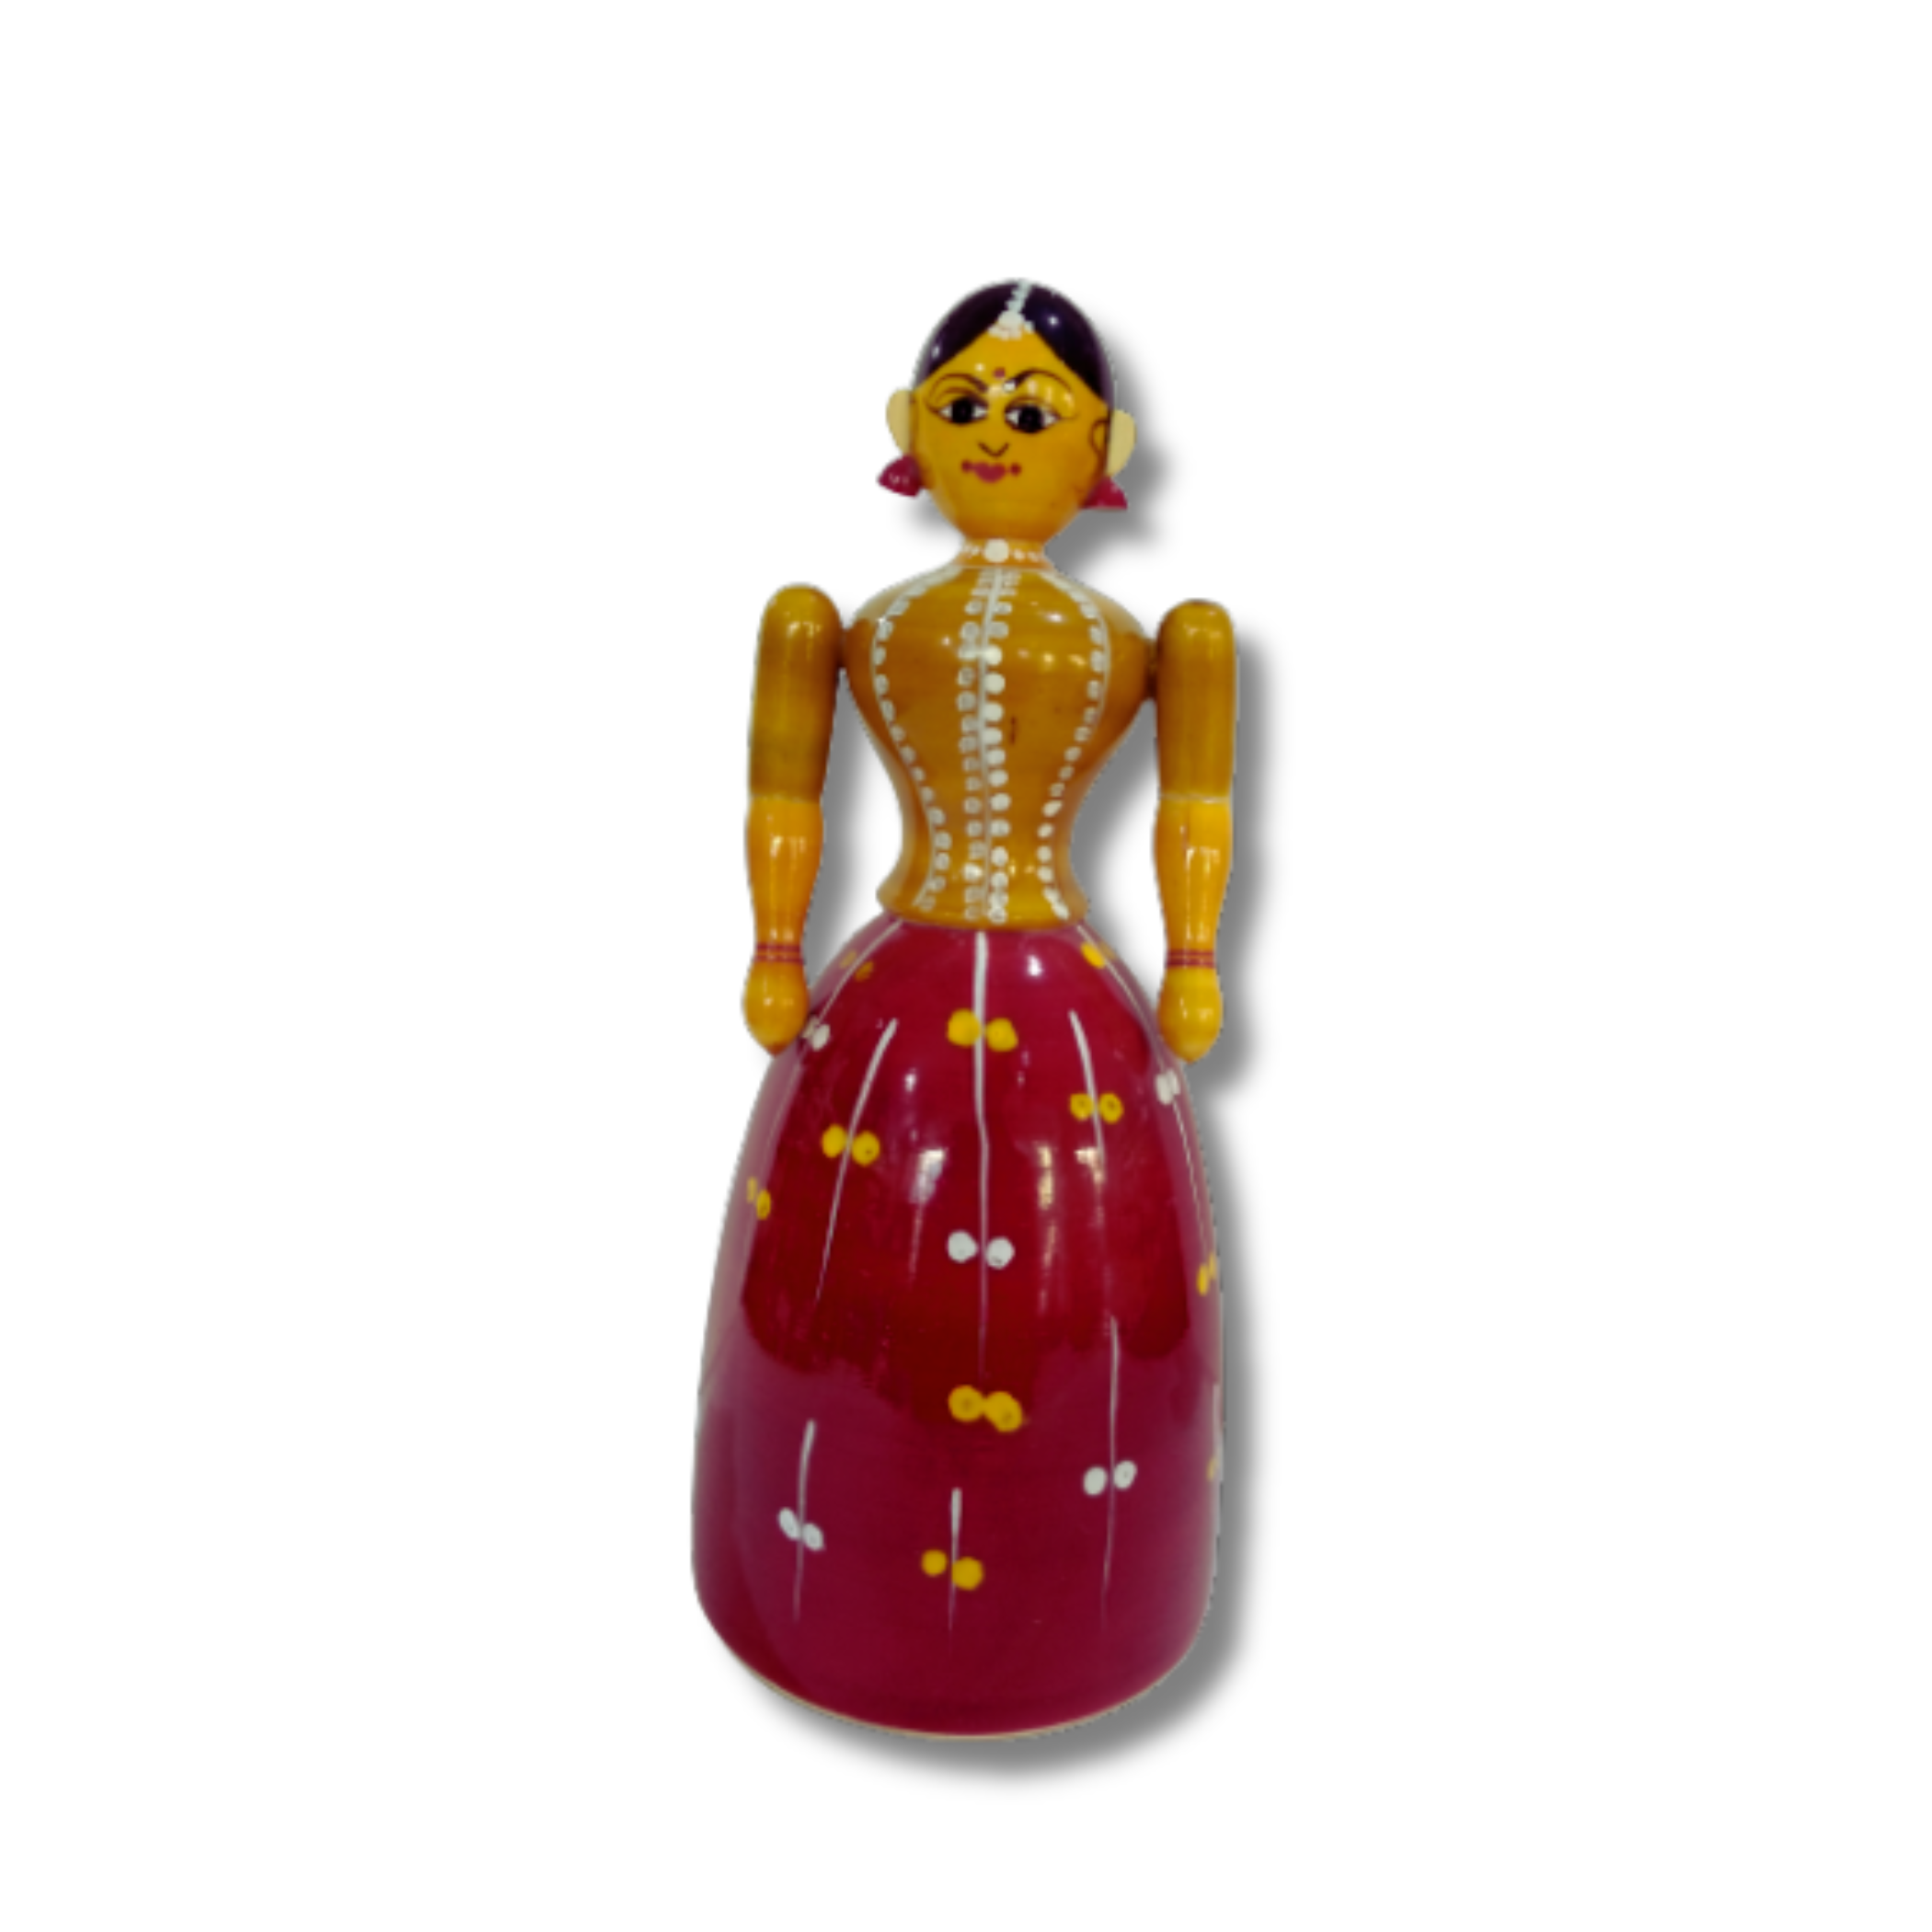 Authentic Etikoppaka Toys: Handcrafted Wooden Masterpieces for Play and Decor - Wooden Fancy Lady - 1 Doll